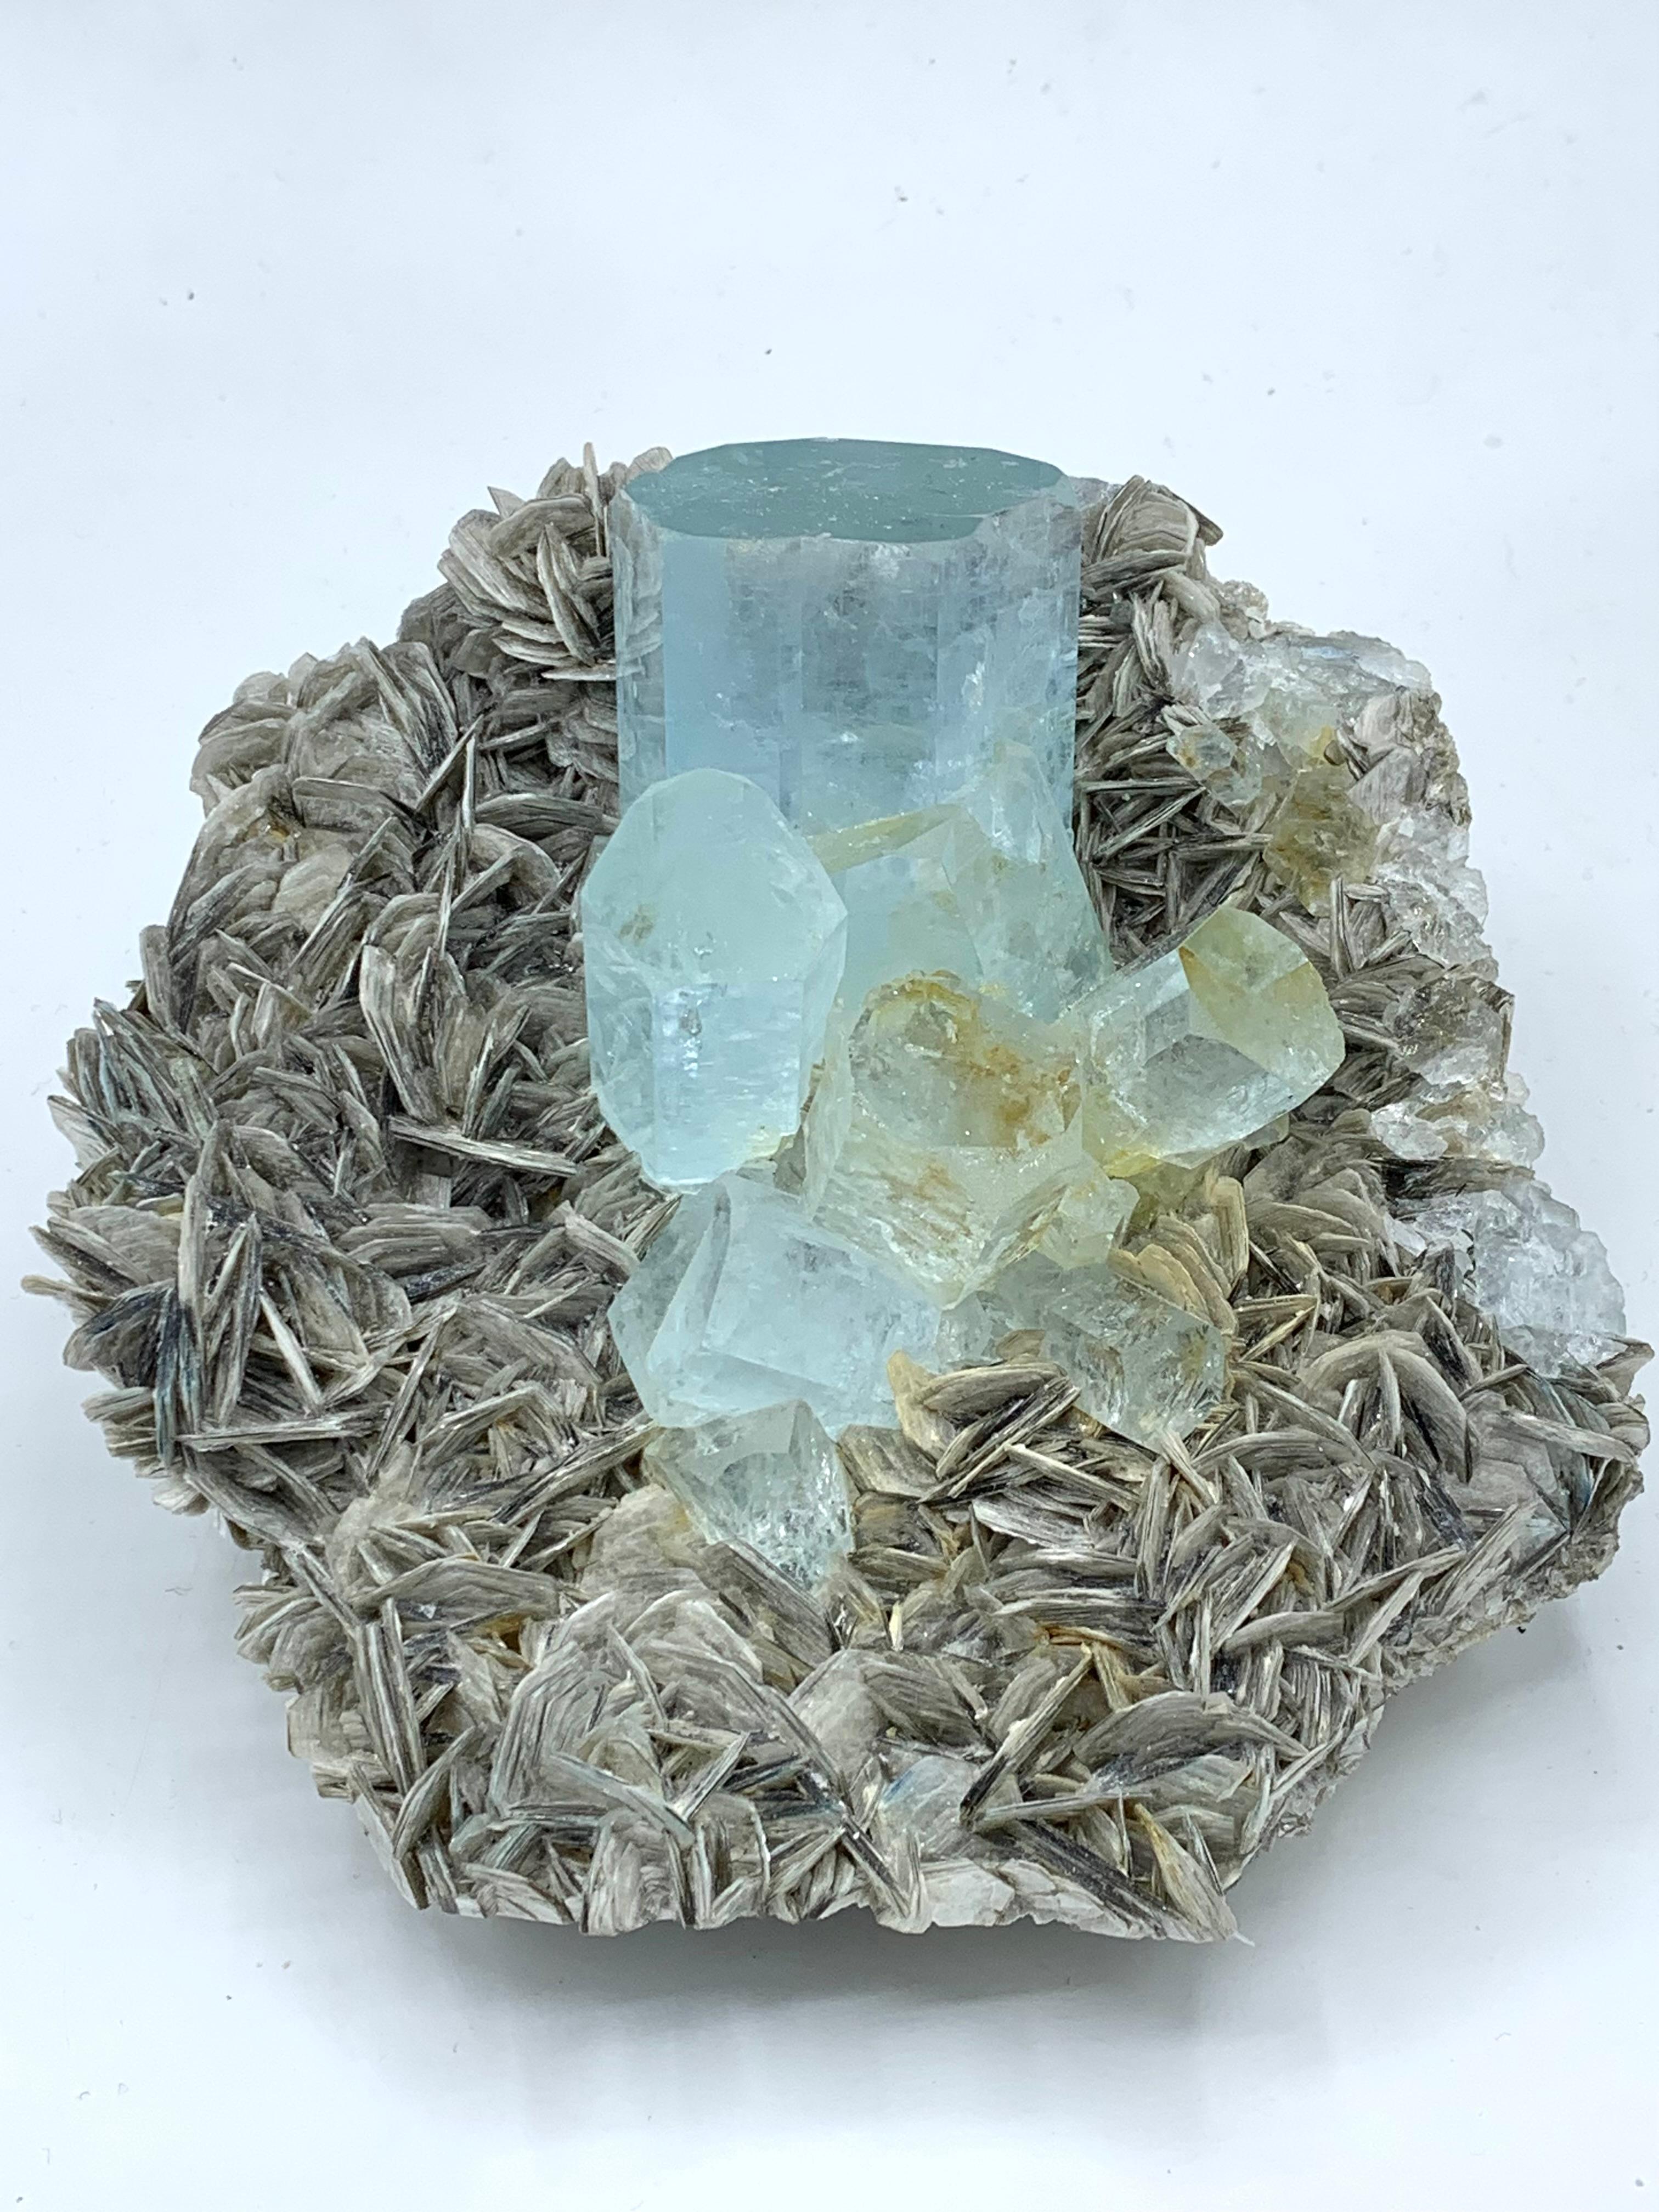 Rock Crystal 1989 Gram Magnificent Aquamarine Specimen With Muscovite From Nagar, Pakistan  For Sale